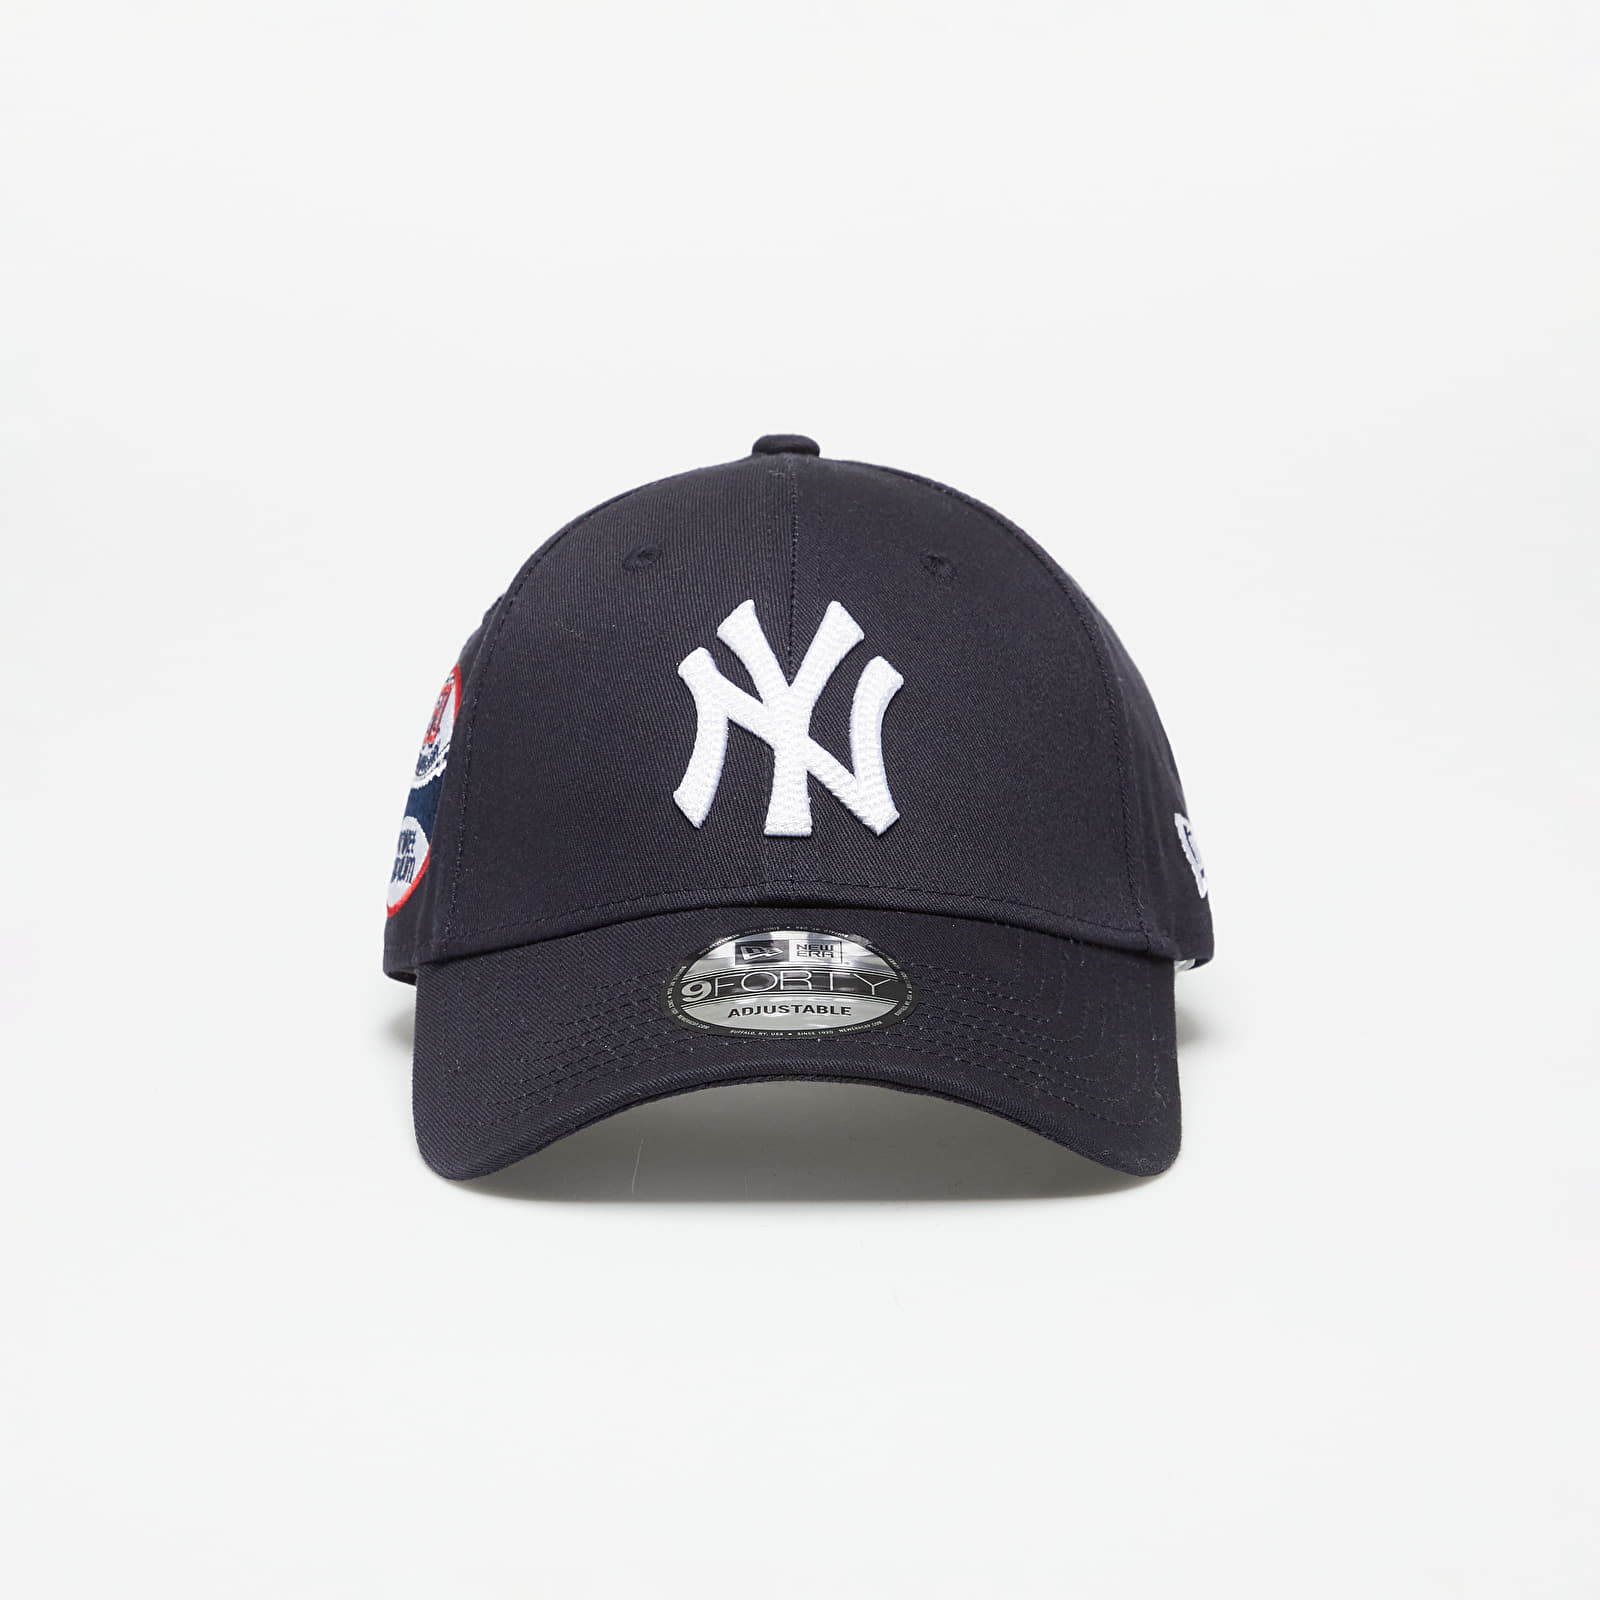 New Era - new york yankees new traditions 9forty adjustable cap navy/ white